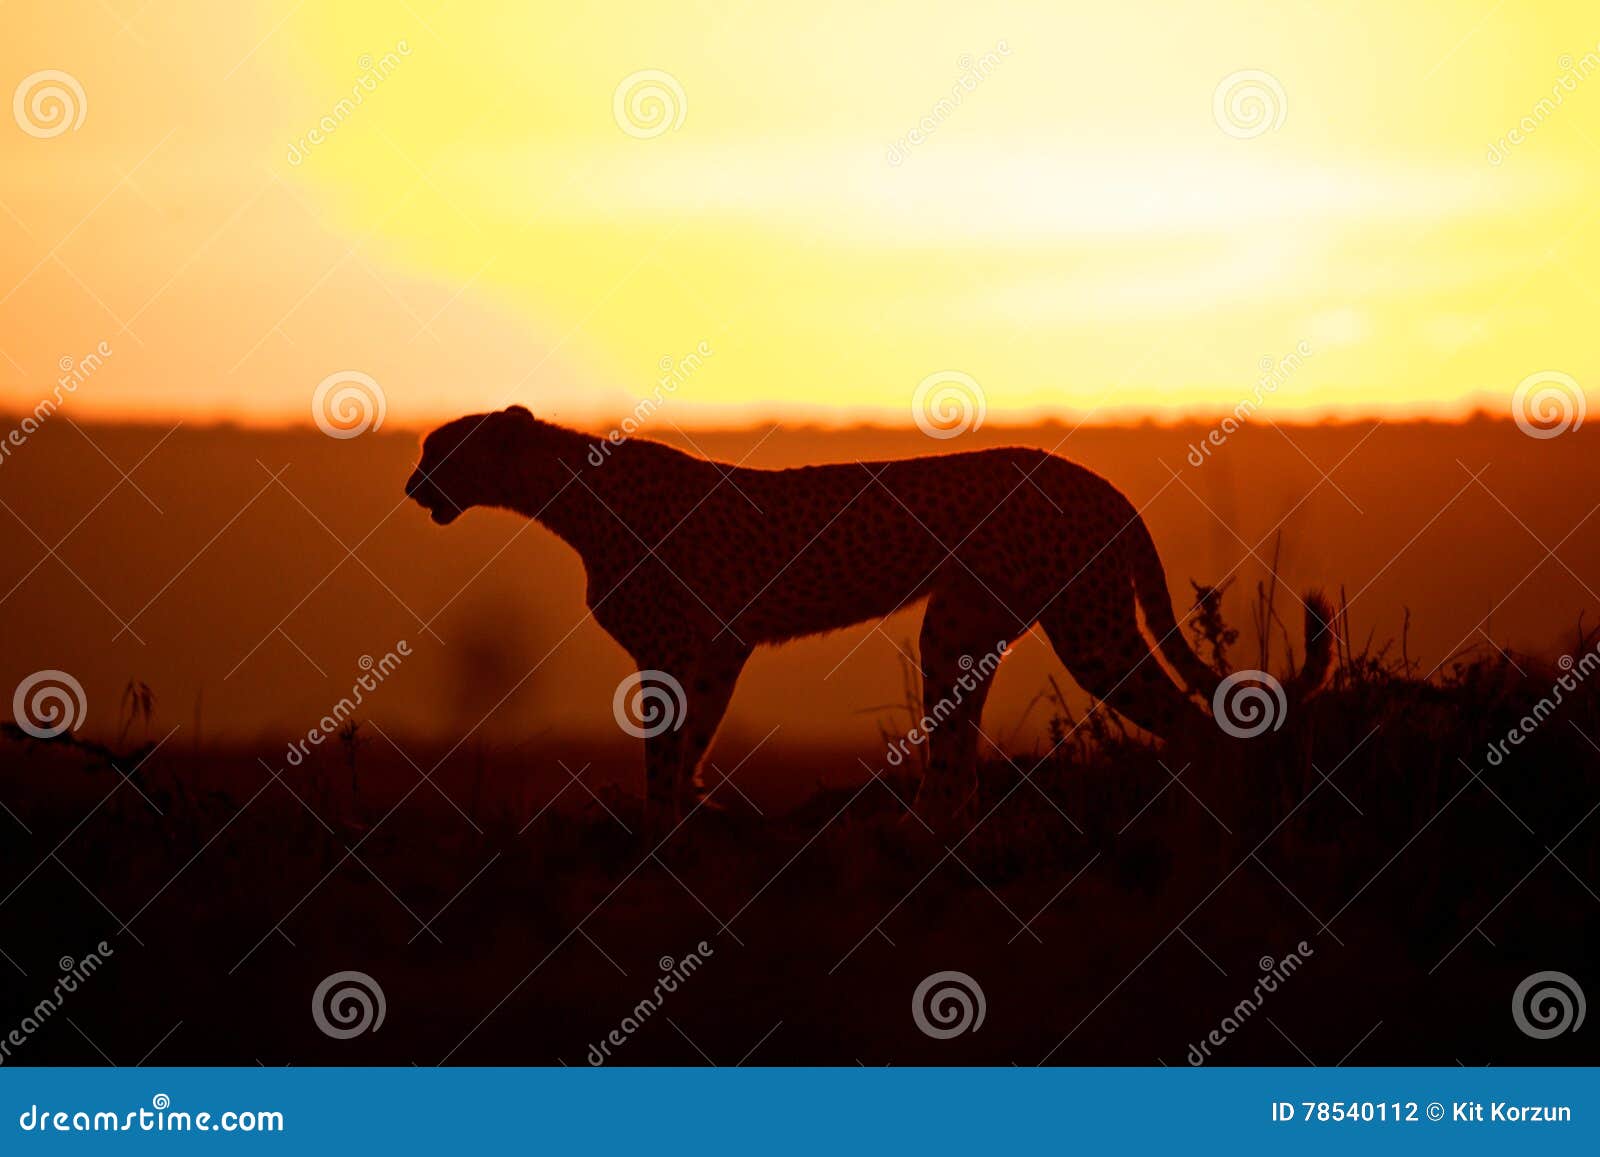 Cheetah on Sunset in Africa Stock Photo - Image of tricolor, animals ...